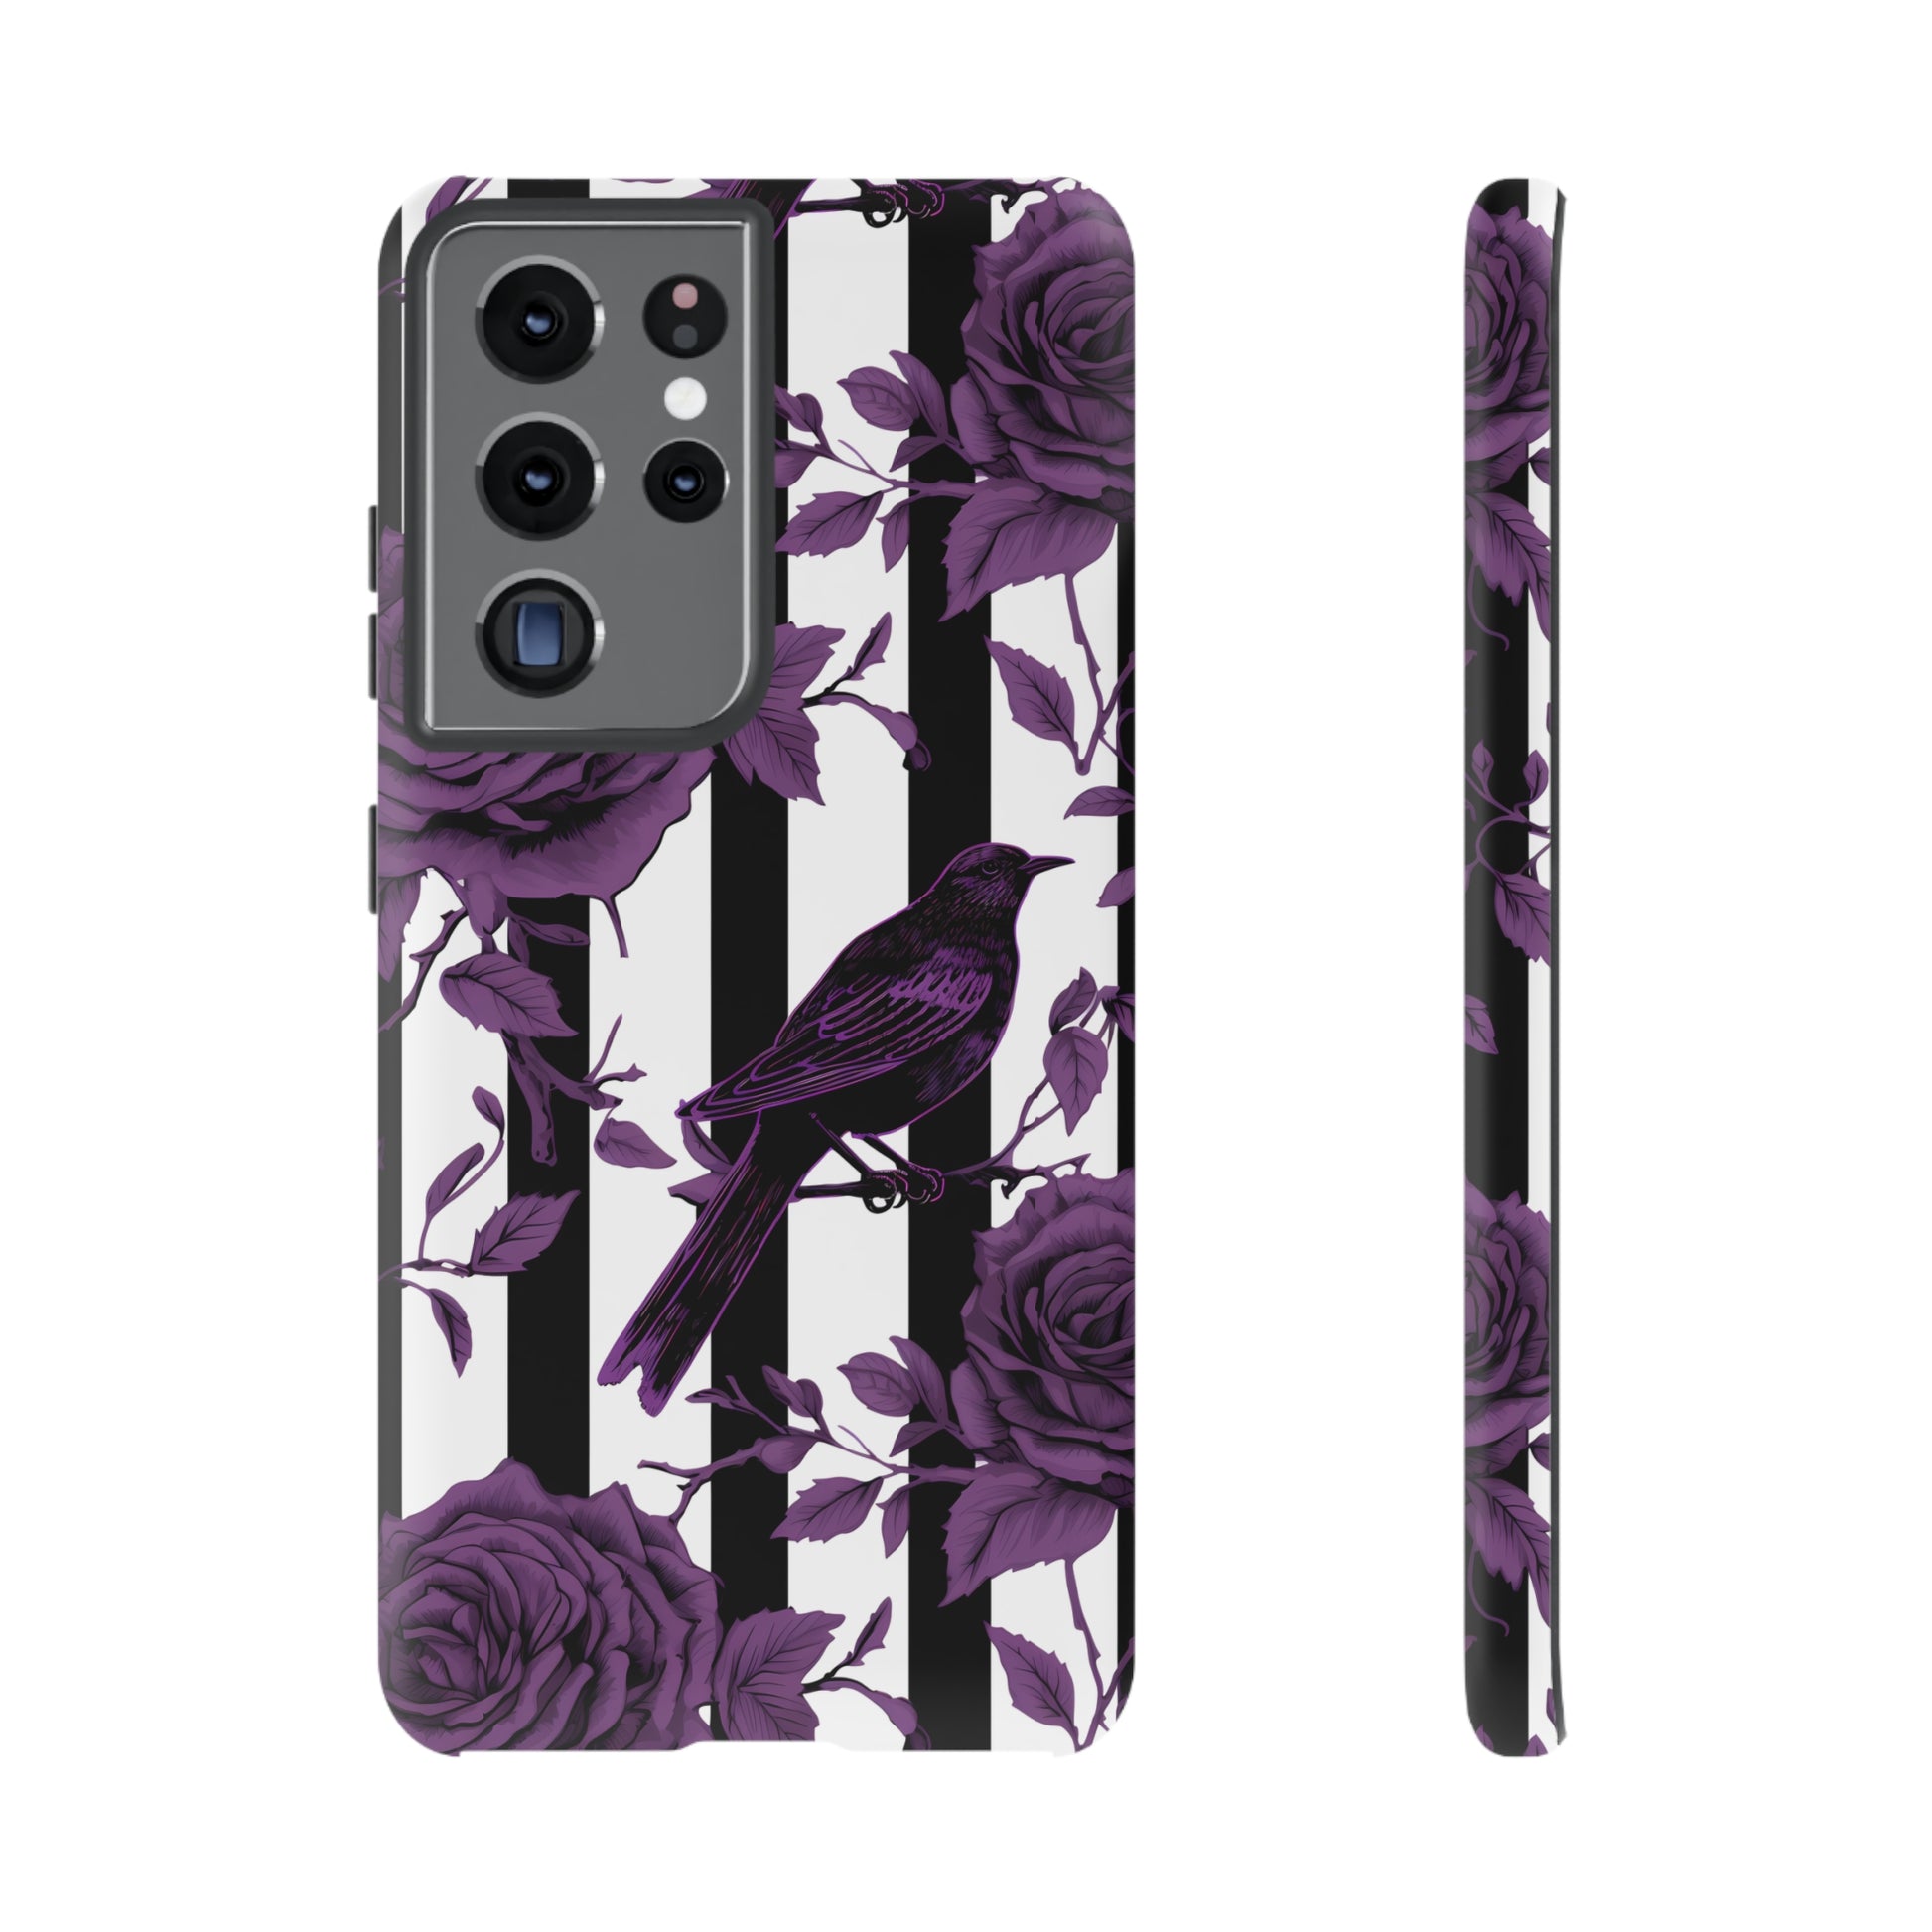 Striped Crows and Roses Tough Cases for iPhone Samsung Google PhonesPhone CaseVTZdesignsSamsung Galaxy S21 UltraMatteAccessoriescrowsGlossy